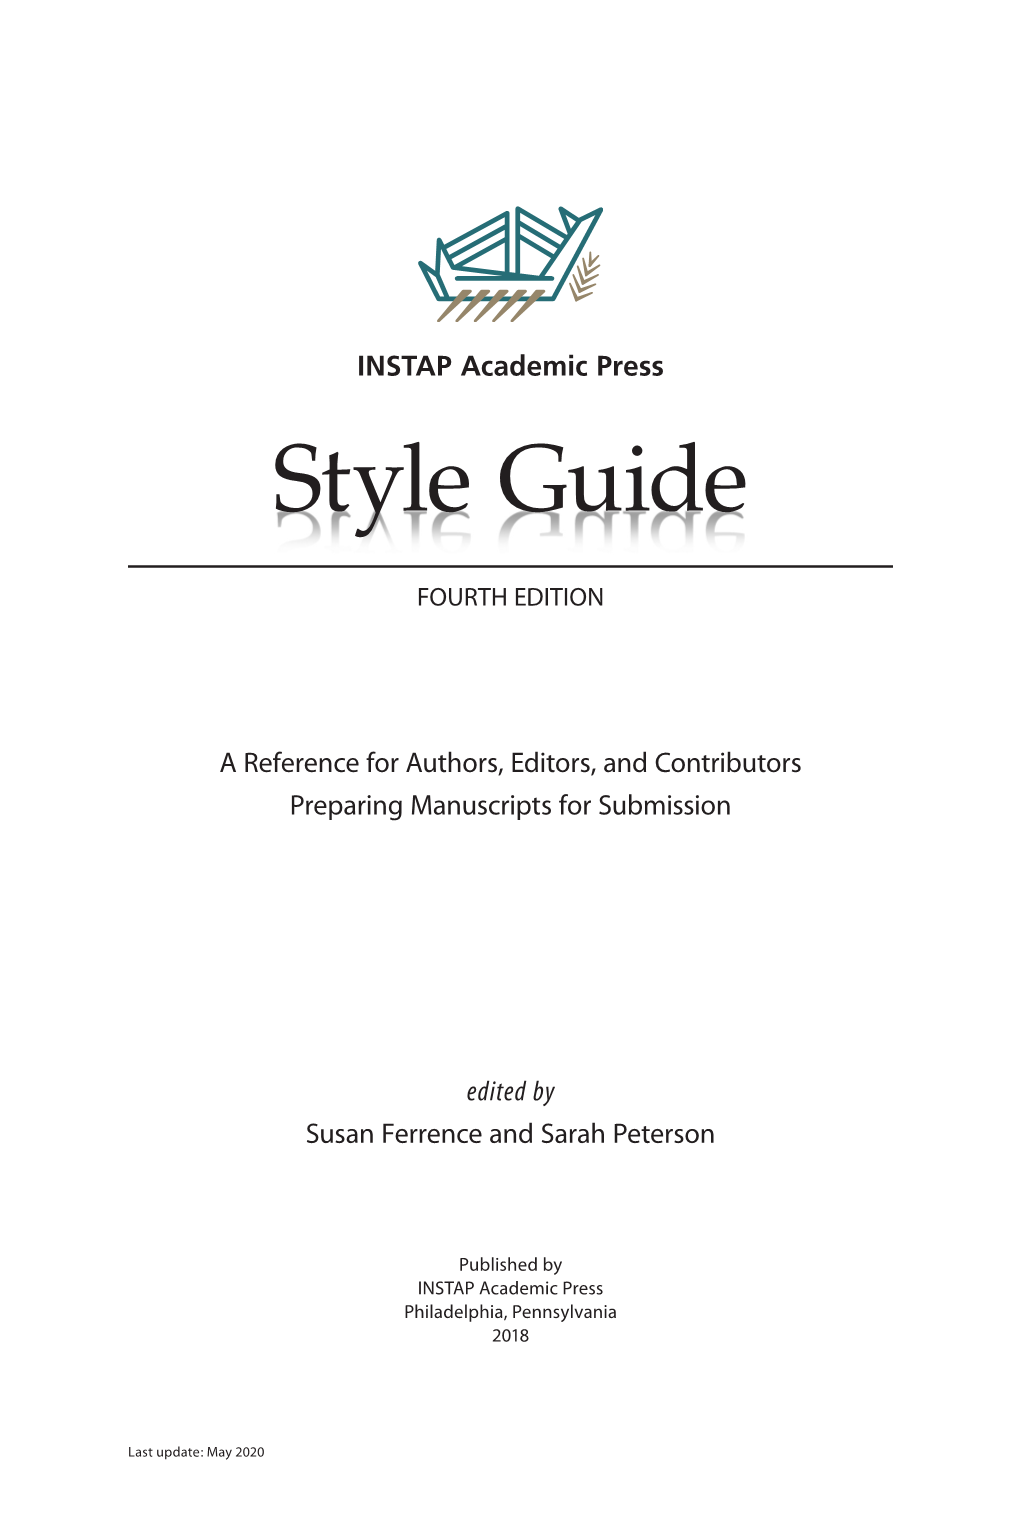 INSTAP Style Guide